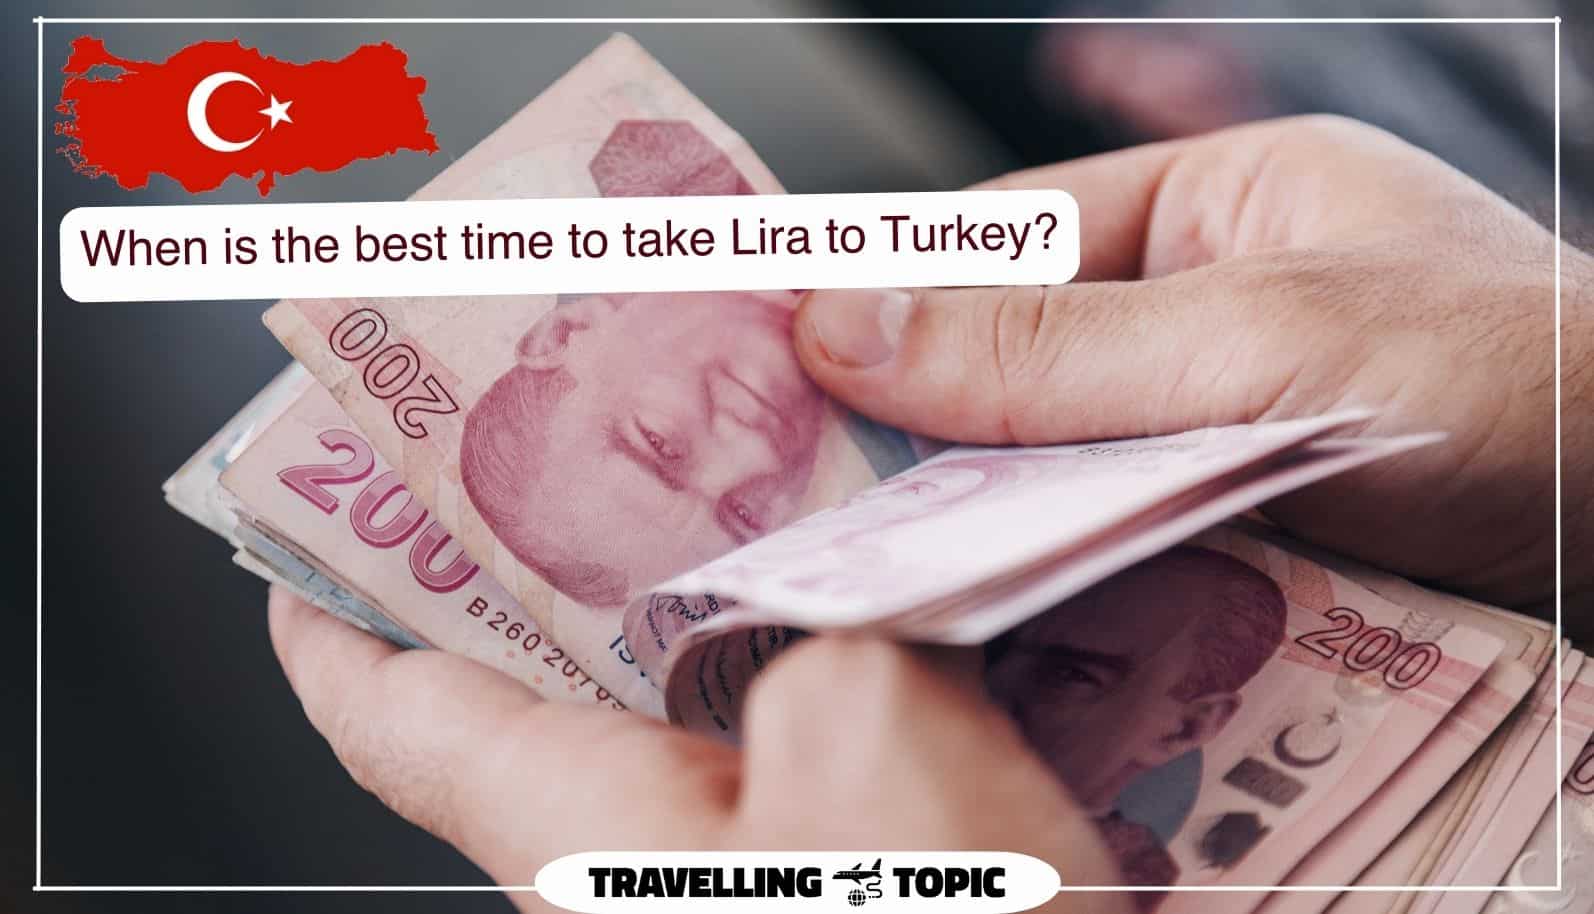 When is the best time to take Lira to Turkey